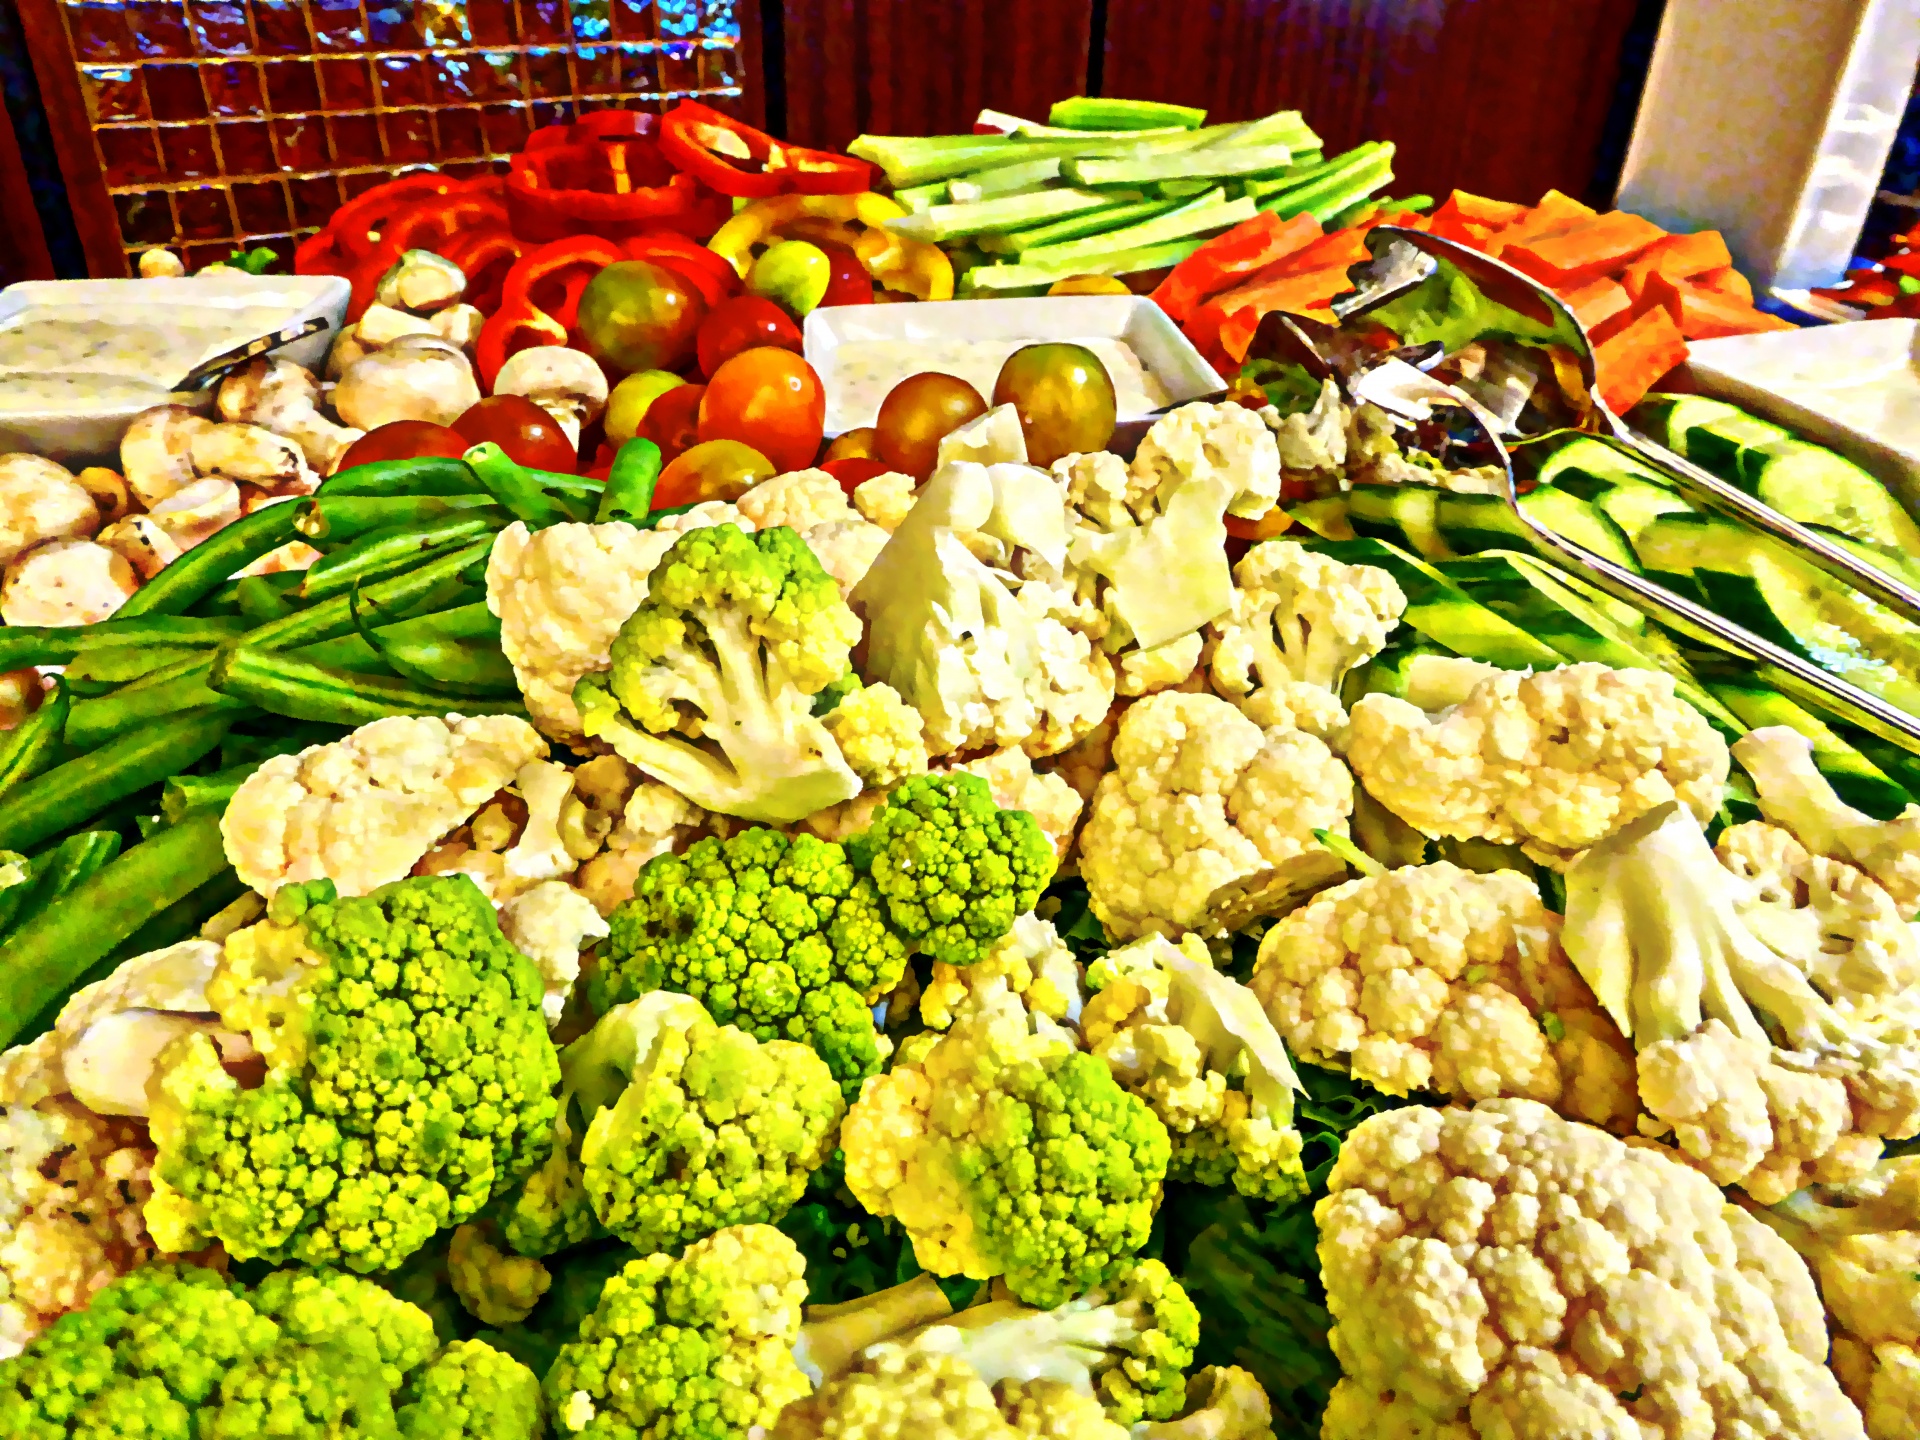 Tray Of Cut Vegetables